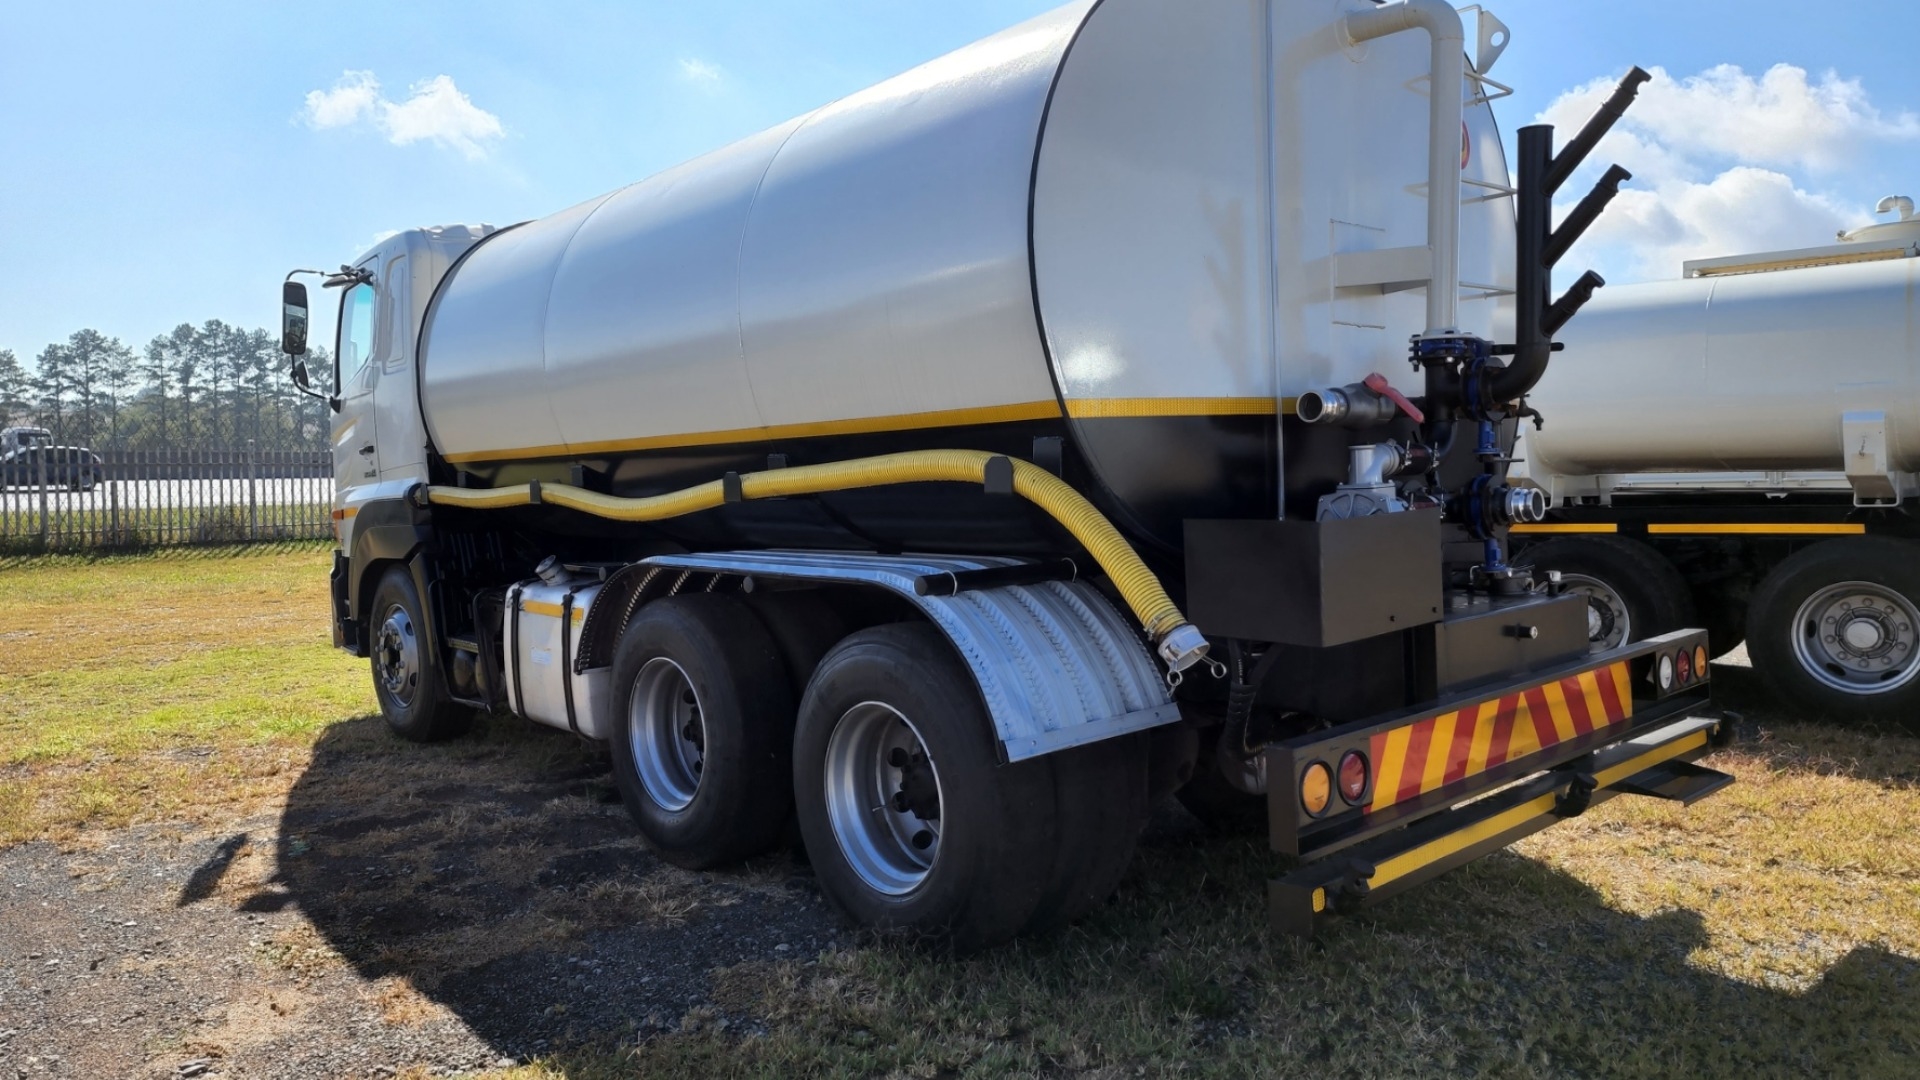 Hino Water bowser trucks 700 2841 16 000Lt Water Tanker 2016 for sale by 4 Ton Trucks | Truck & Trailer Marketplaces